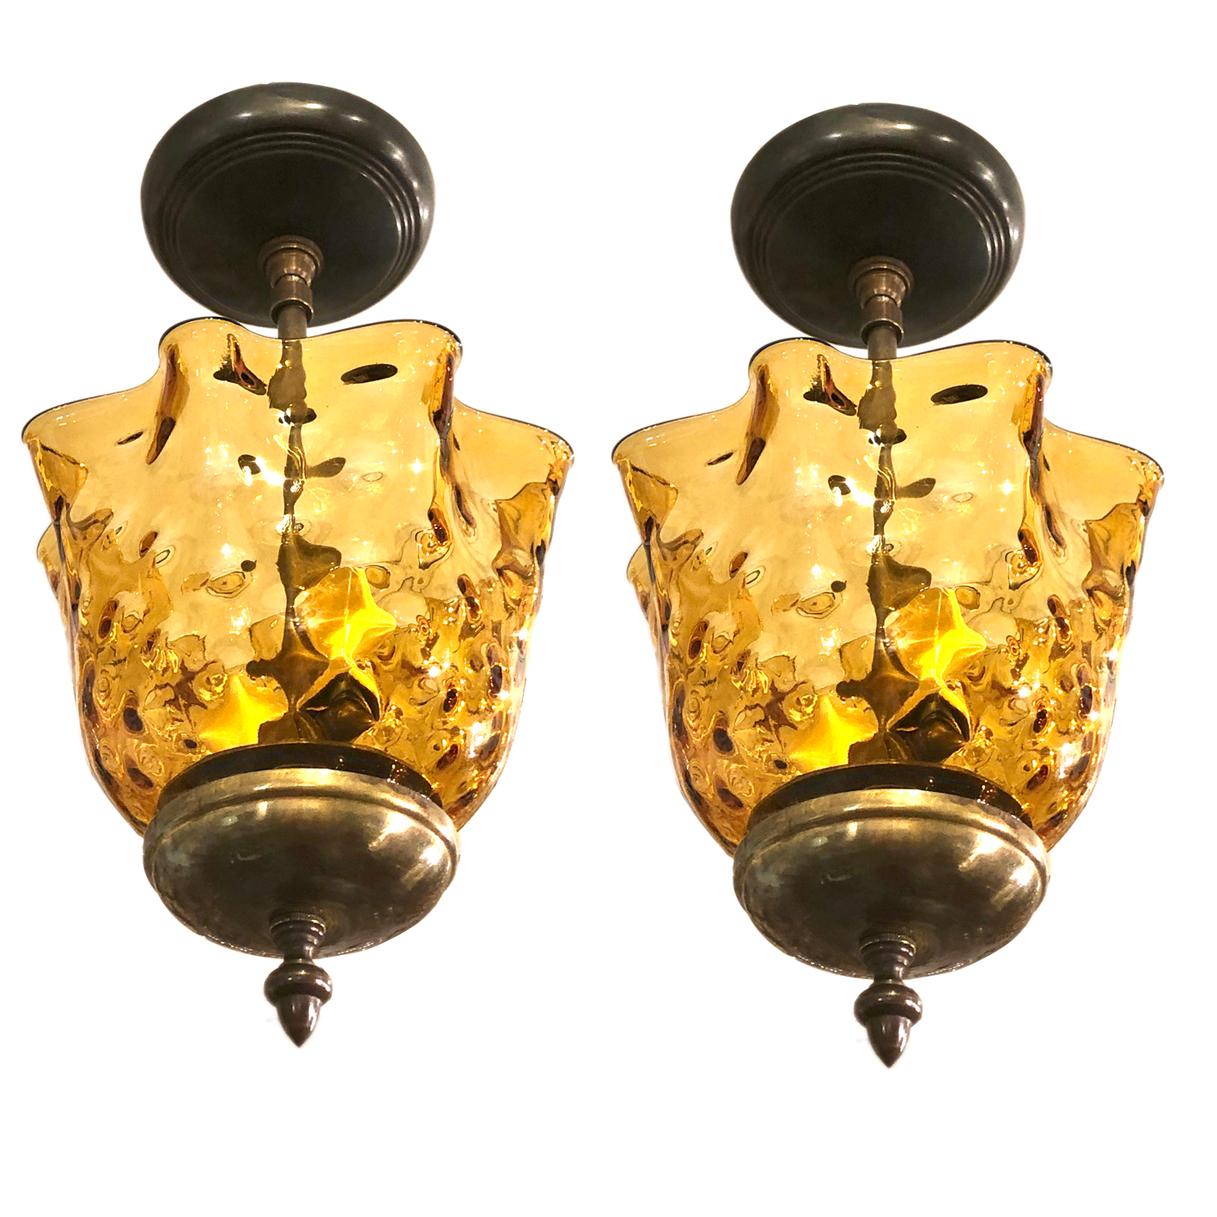 A set of three French circa 1950's molded amber glass light fixtures with two interior lights each.

Measurements:
Drop: 15